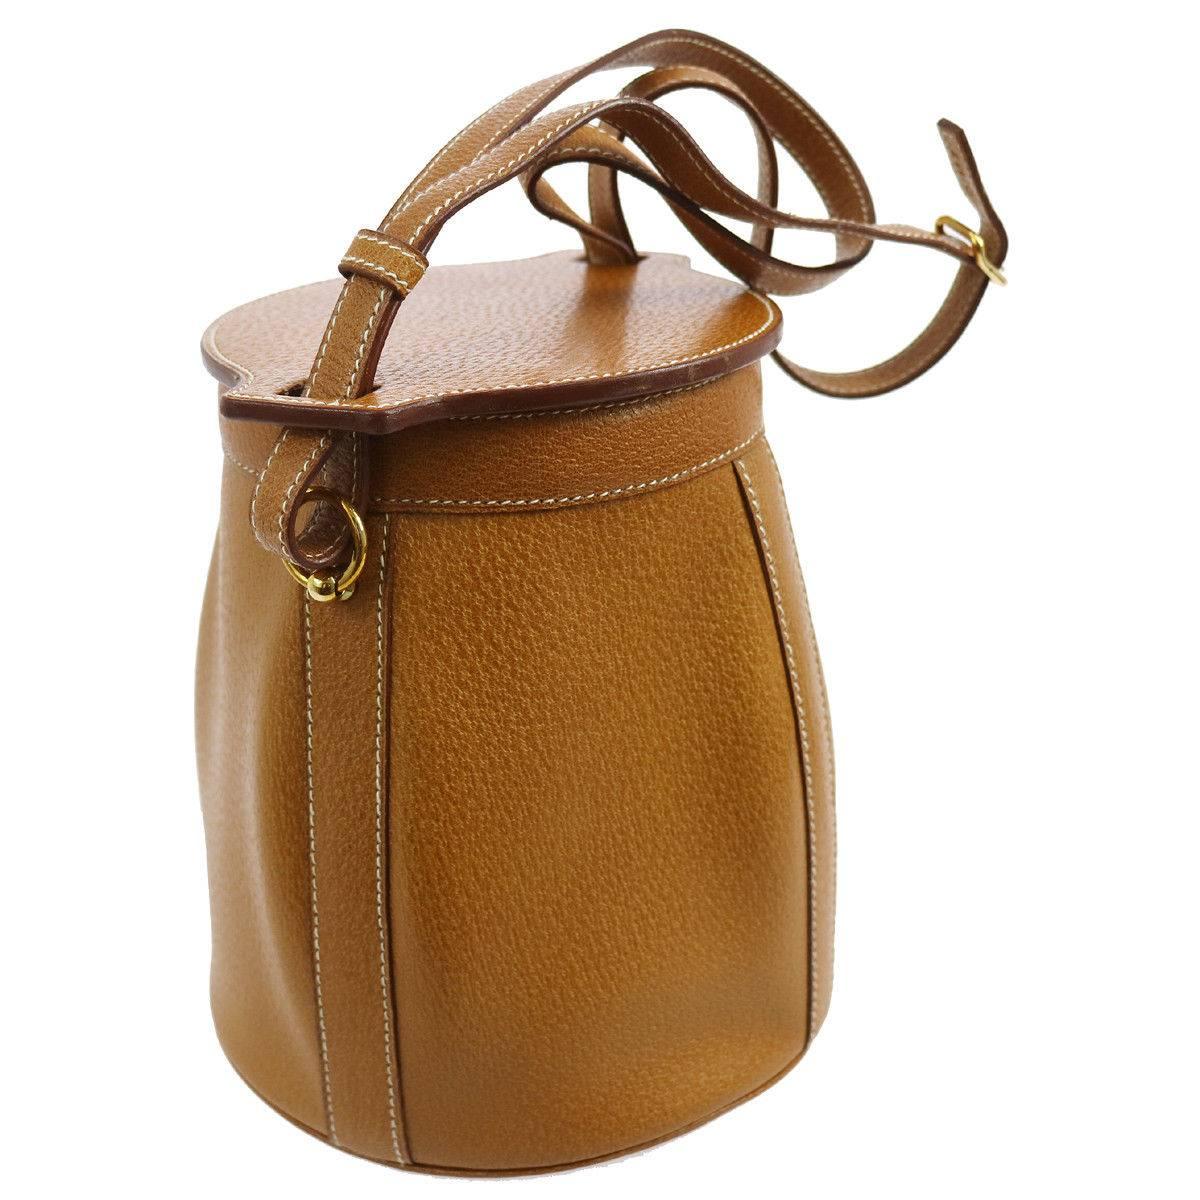 Hermes Cognac Leather Bucket Top Handle Shoulder Bag in Box

Leather
Gold tone hardware
Leather lining
Made in France
Date code Circle X
Single strap drop 15"
Double strap drop 8"
Measures 6.75" W x 7.5" H x 6.75" D